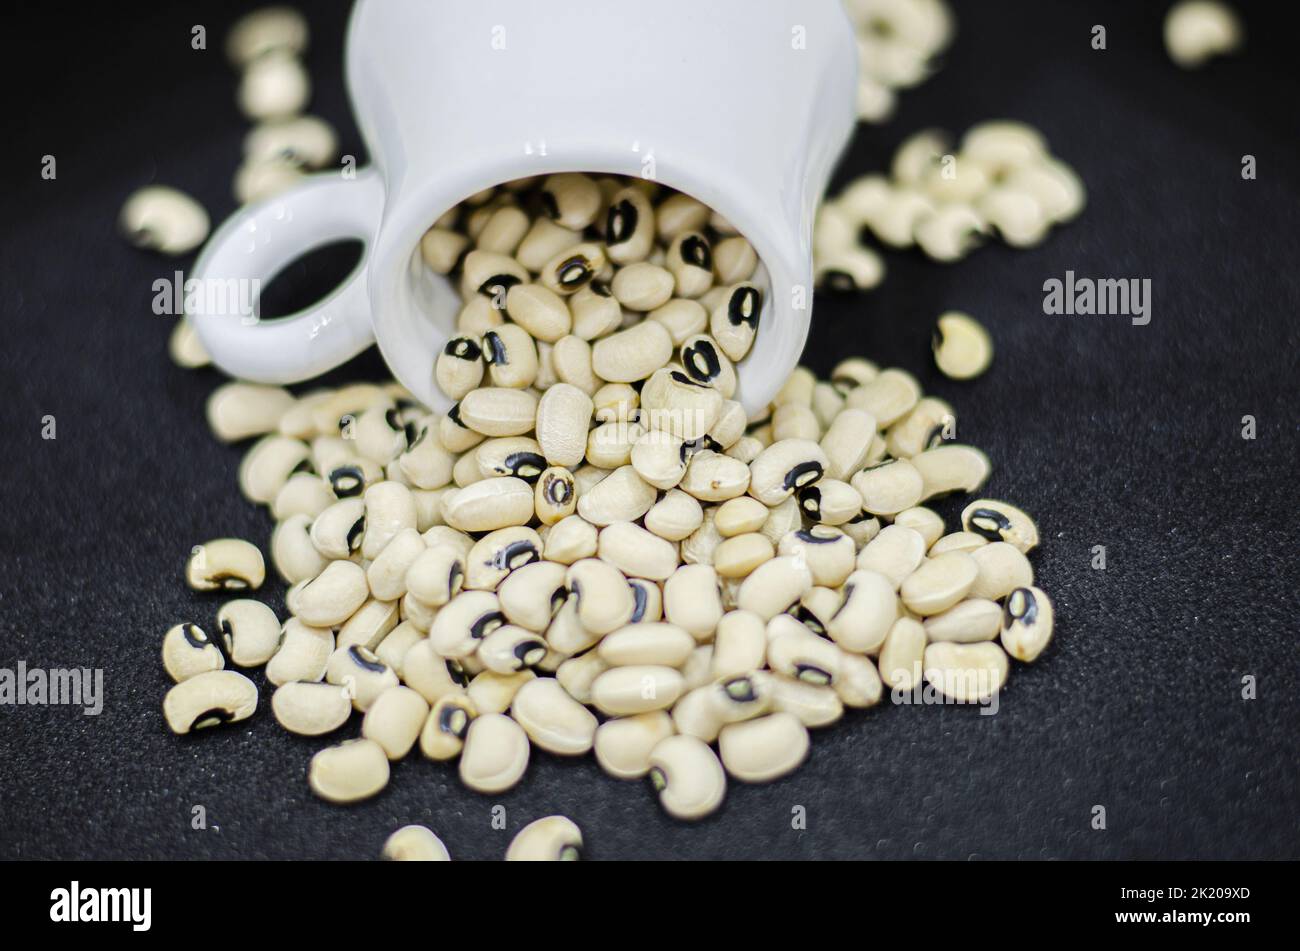 Black eyed beans pouring from a mug on a black background,  dried kidney beans on a black background Stock Photo